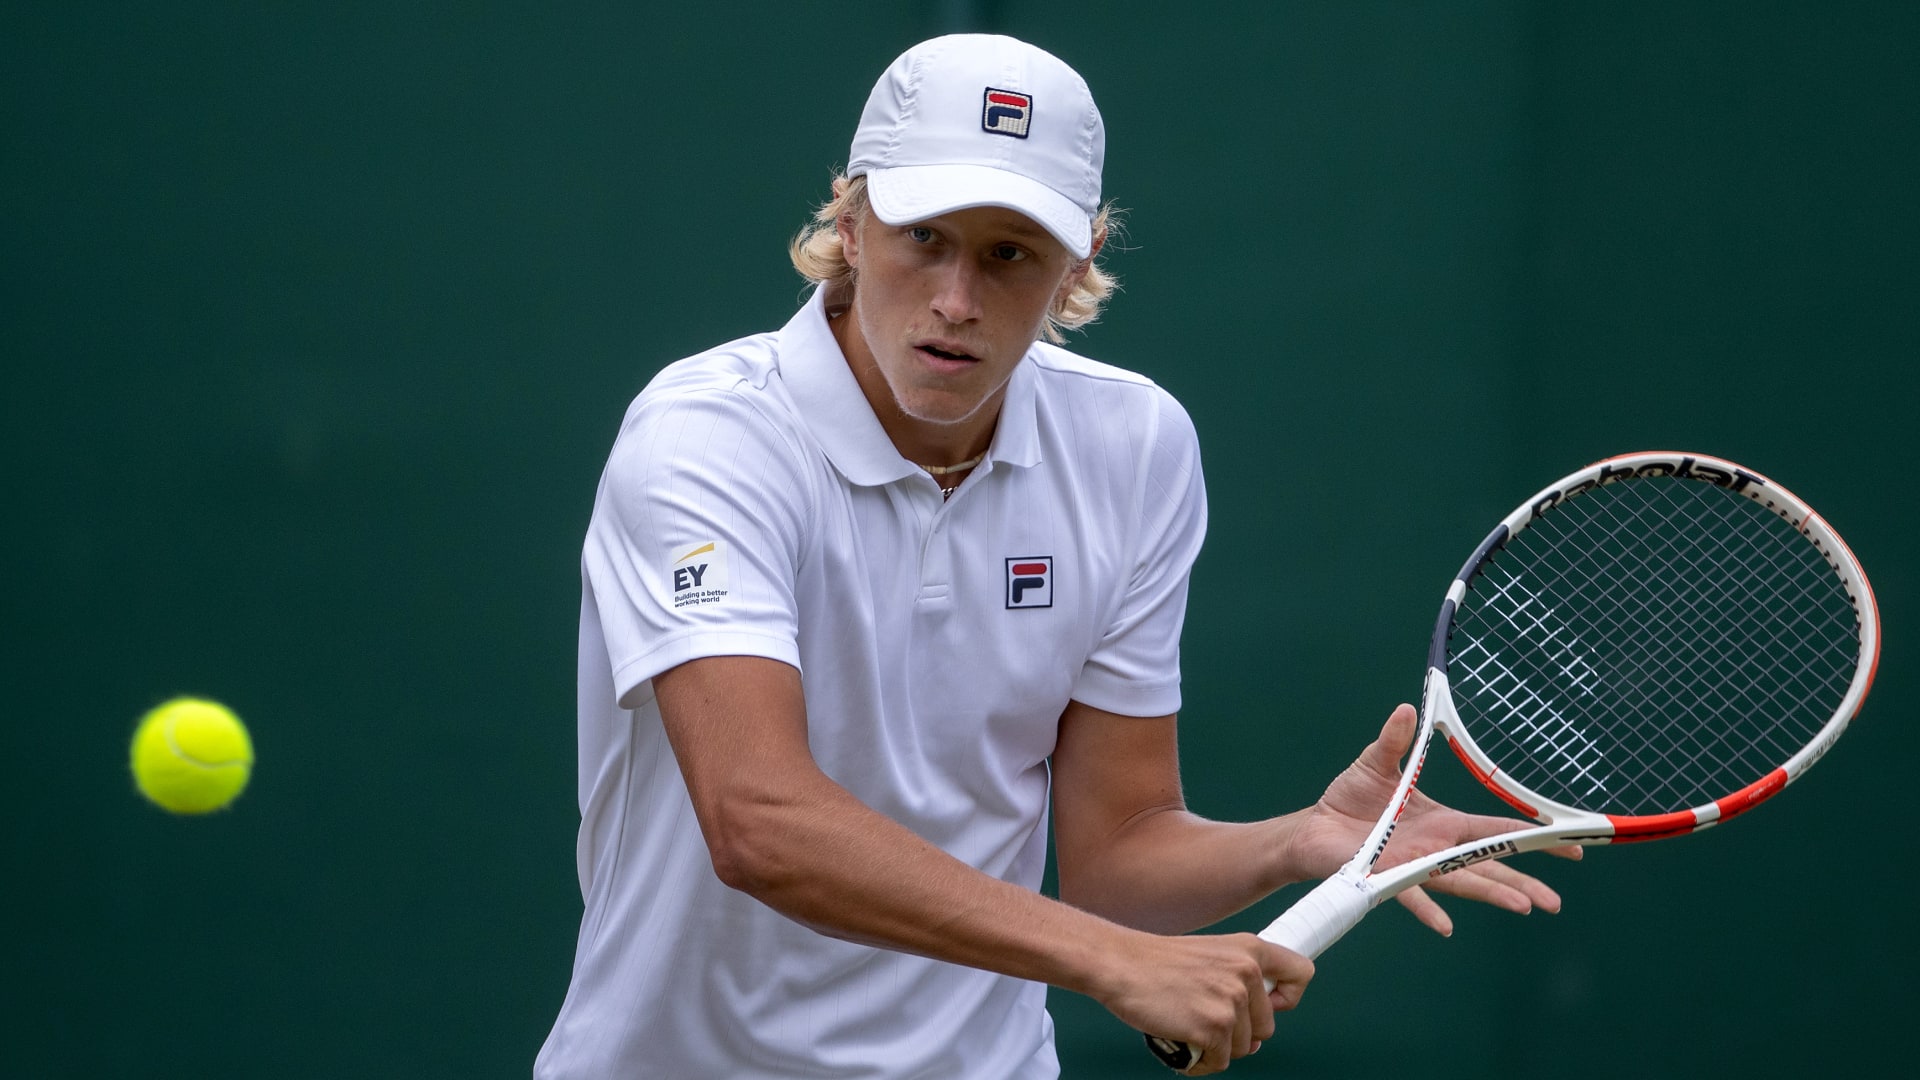 Björn Borgs son Leo wins first match on ATP tour, in Bastad, Sweden